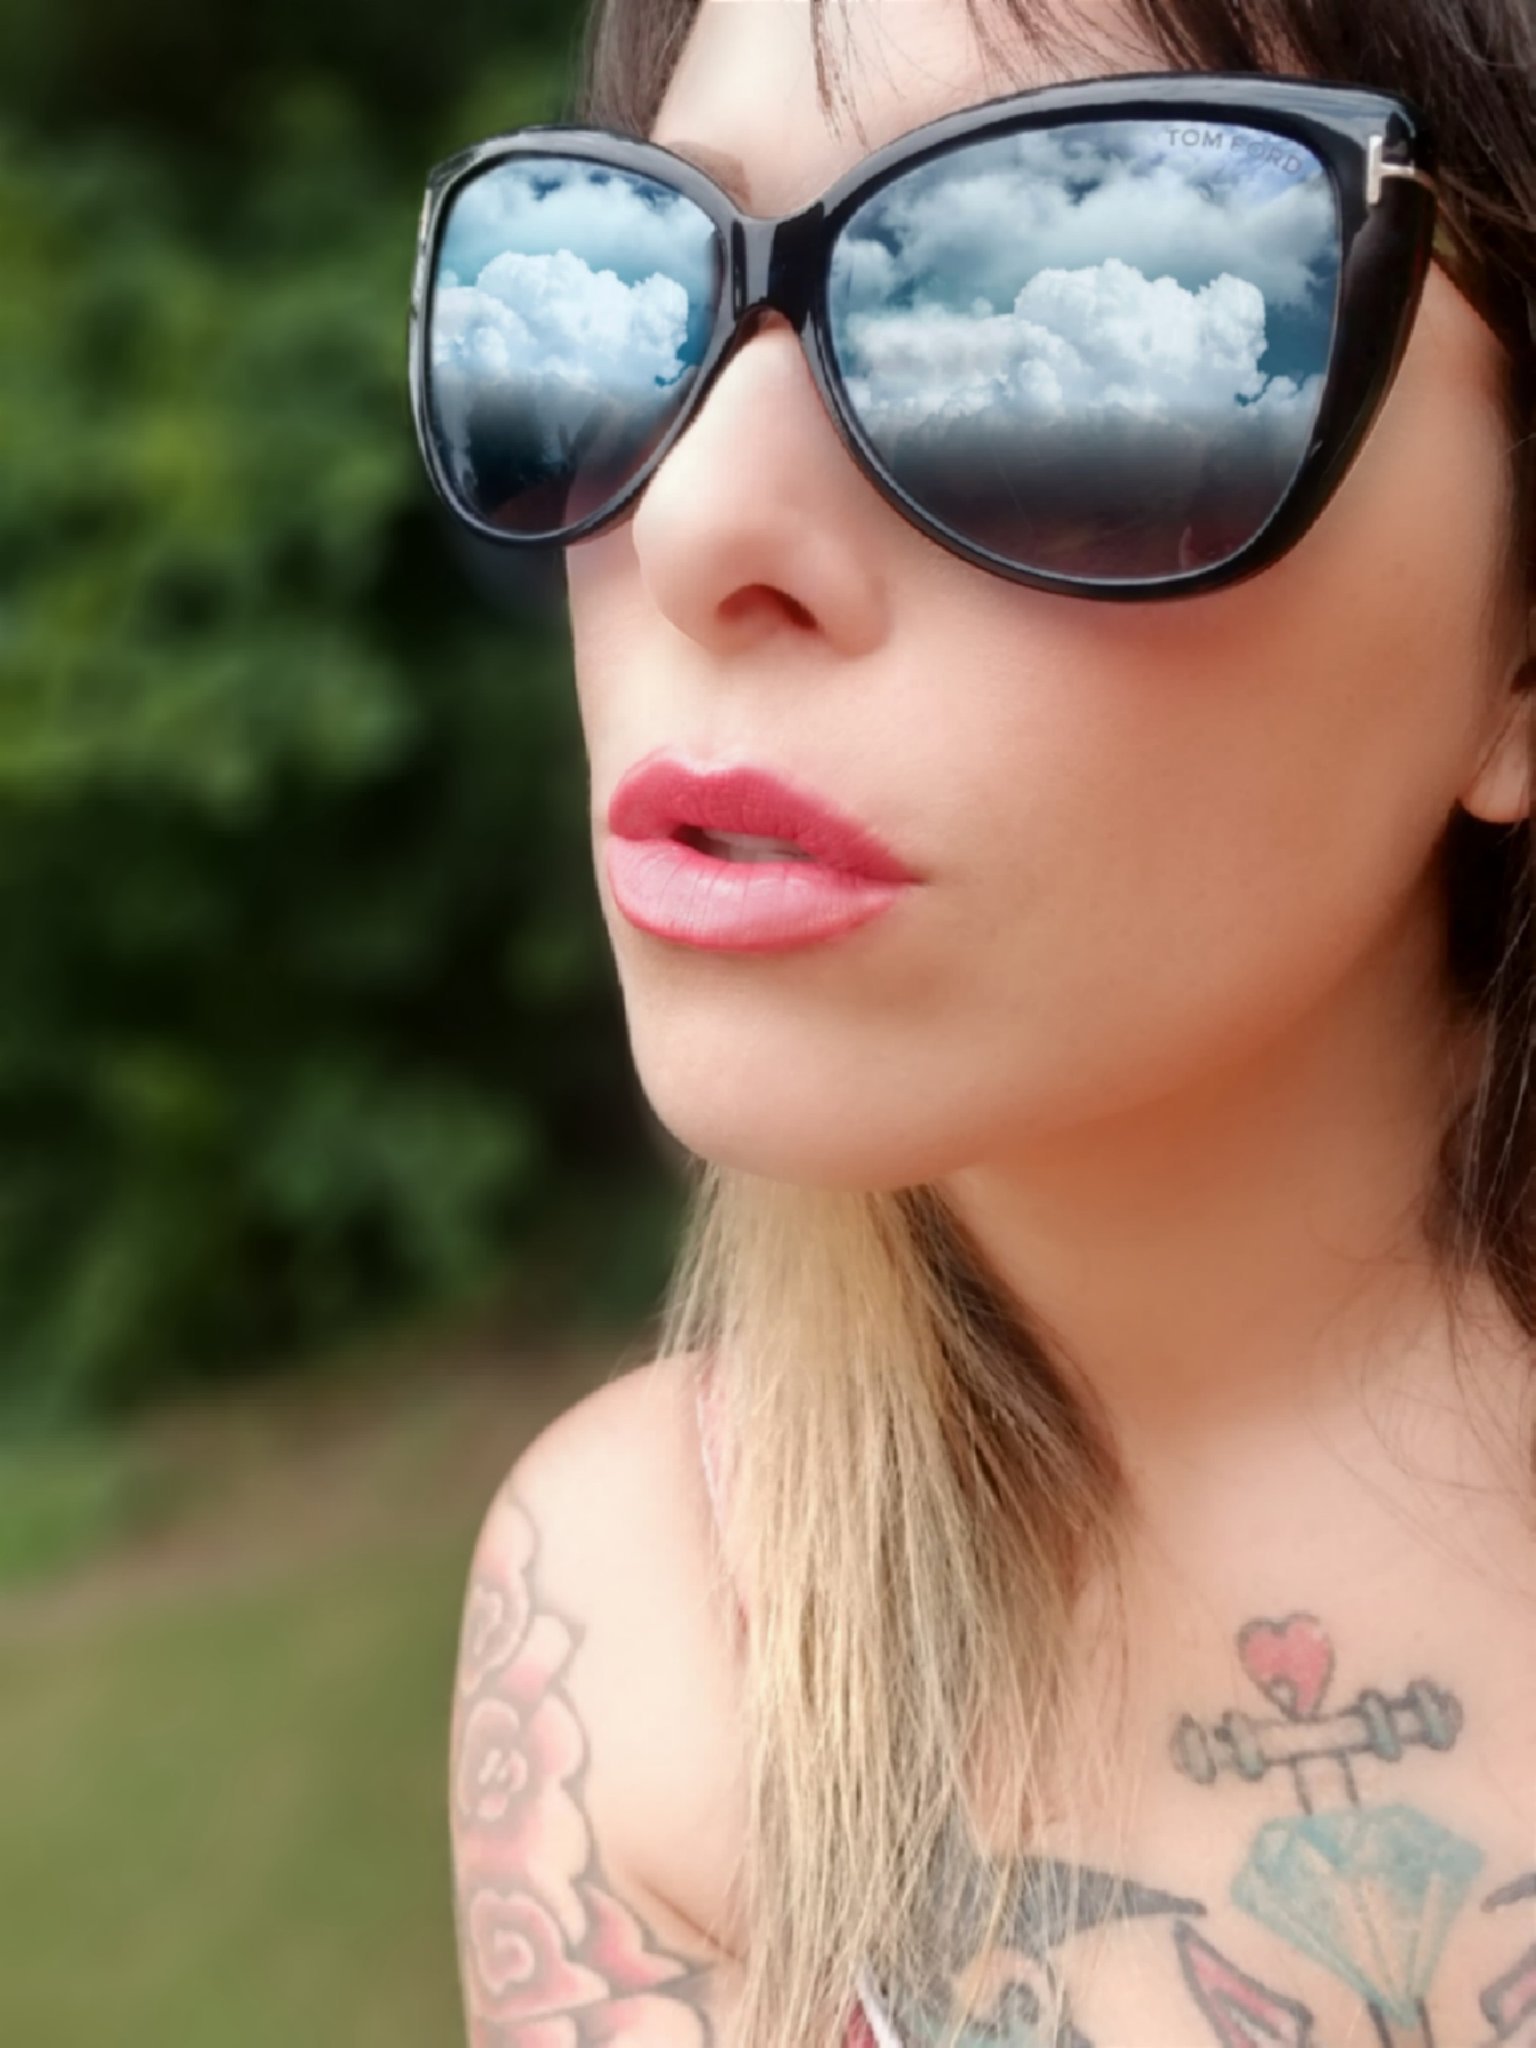 Mom life, product review, Christa Thompson, Tom Ford sunglasses